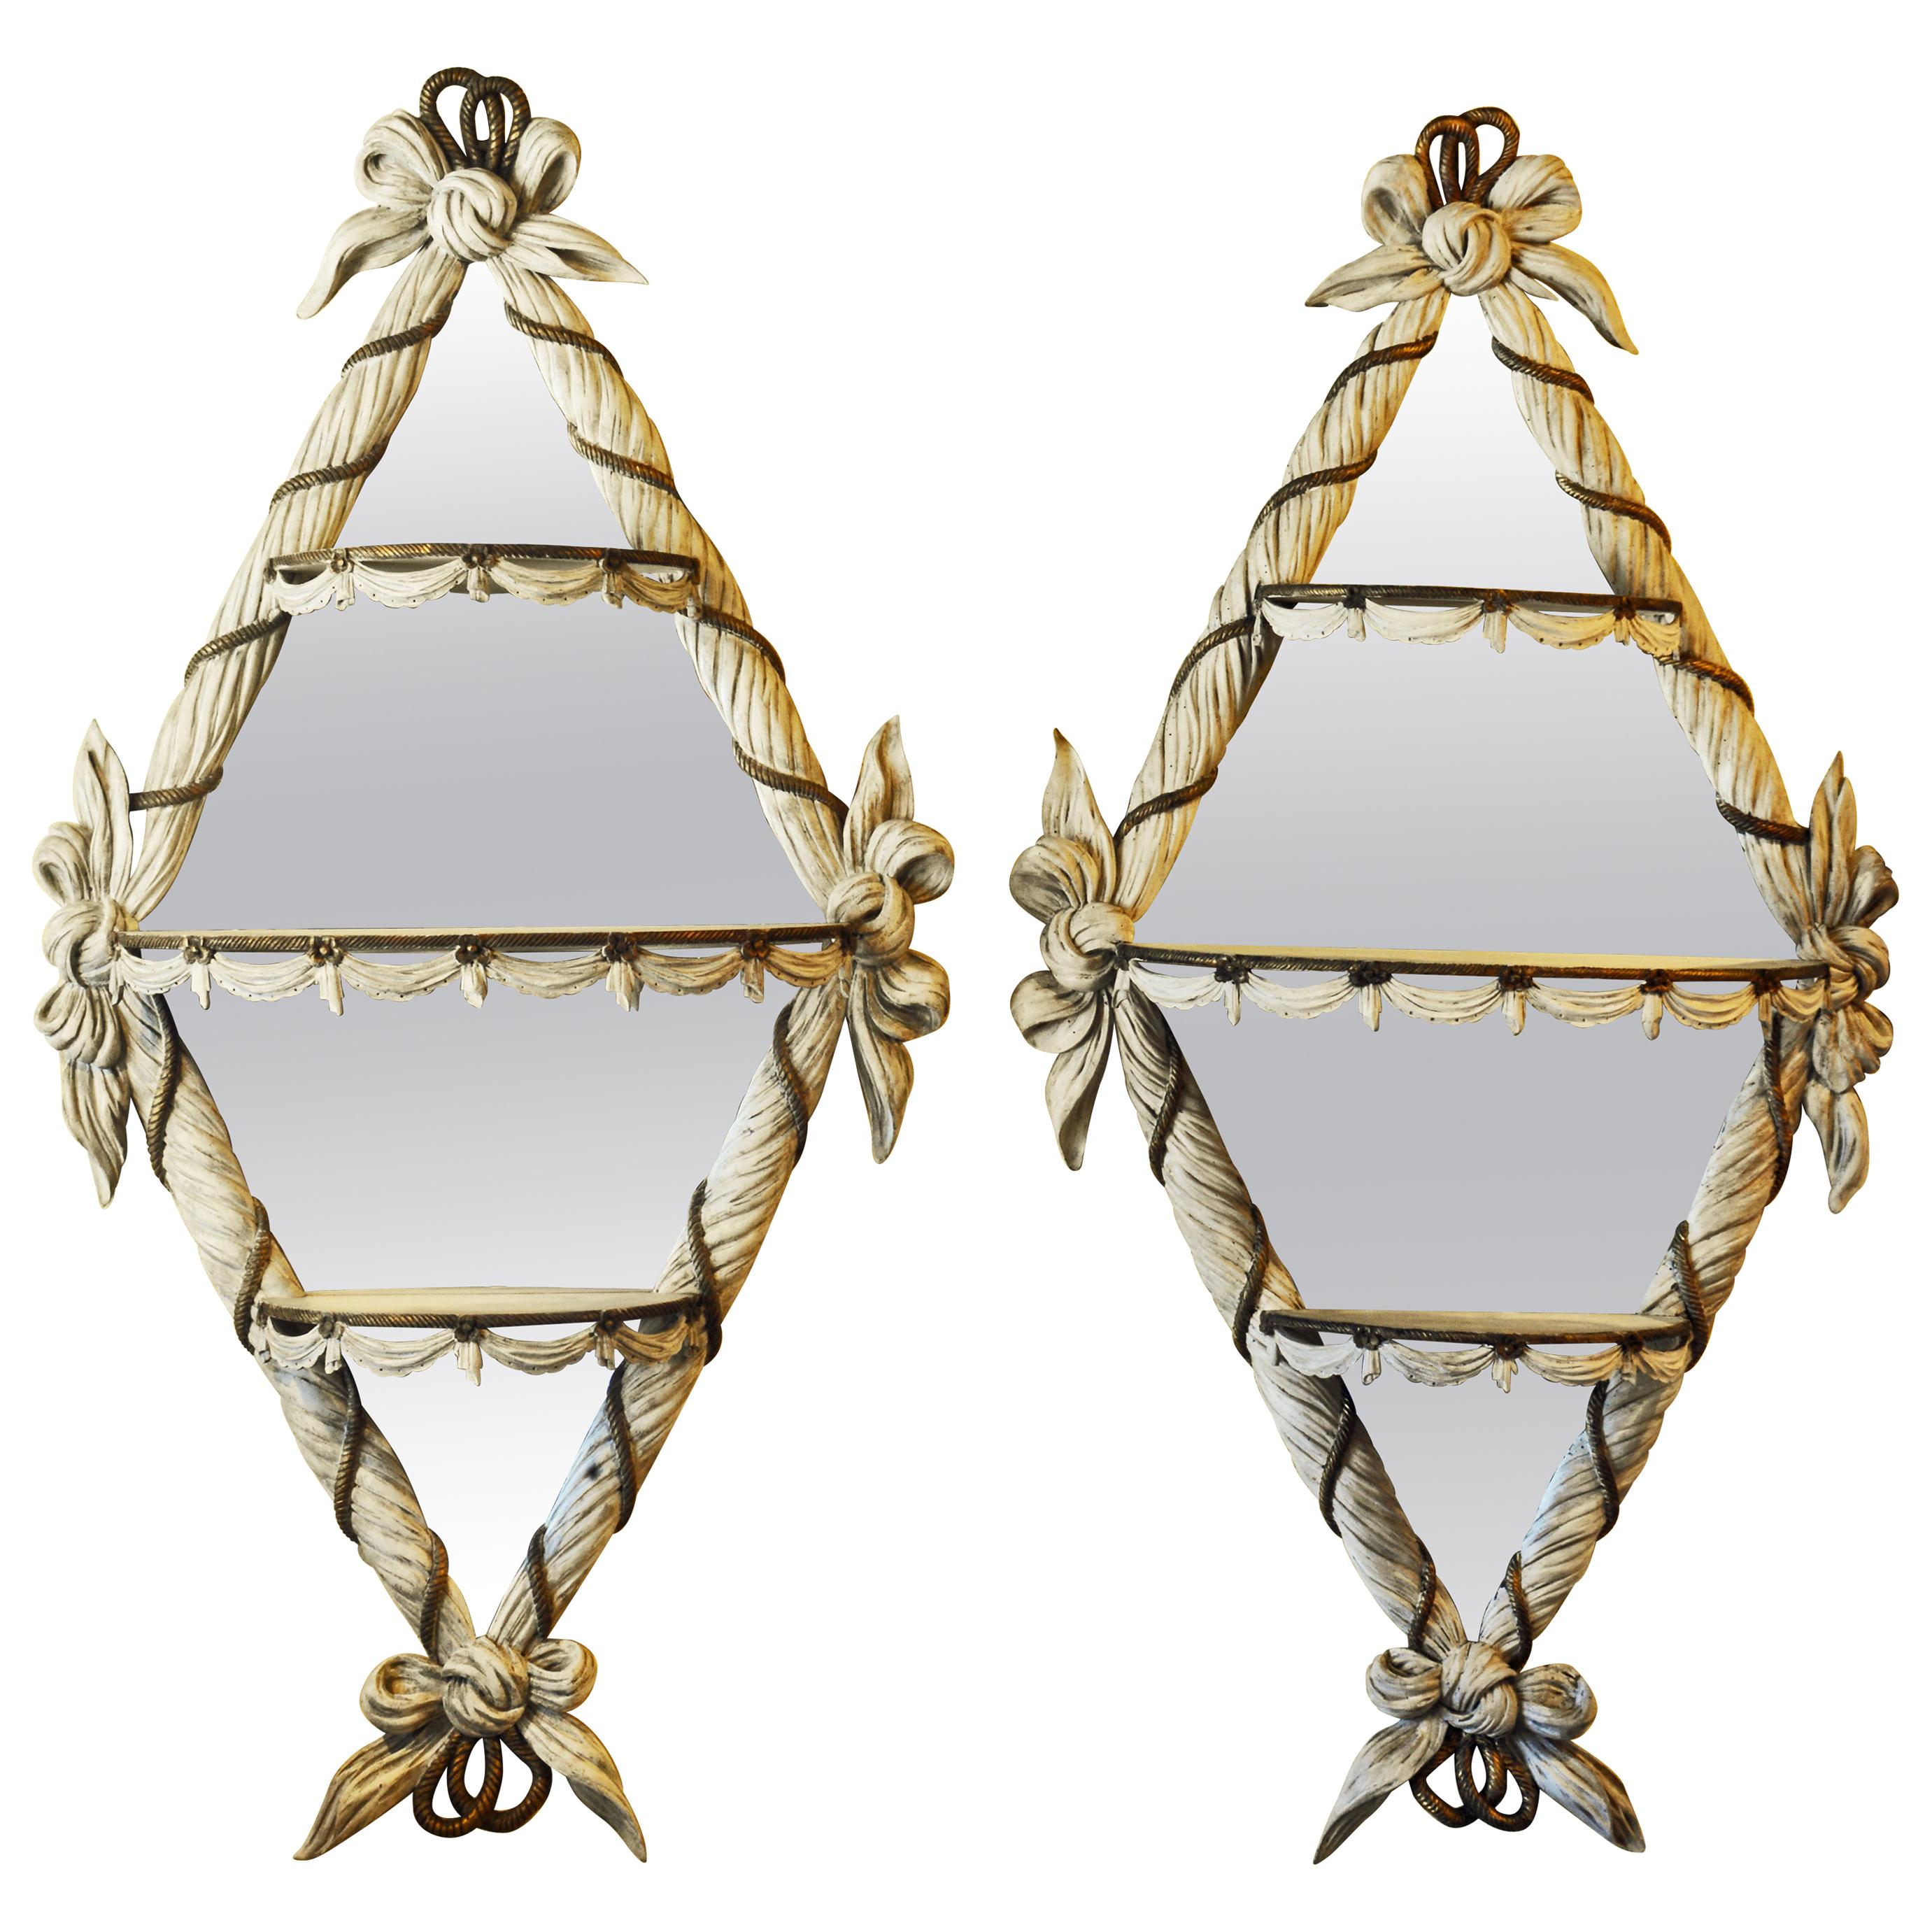 Pair of Paint and gilt Scarf carved Diamond Shape Mirrors with Demilune Shelves